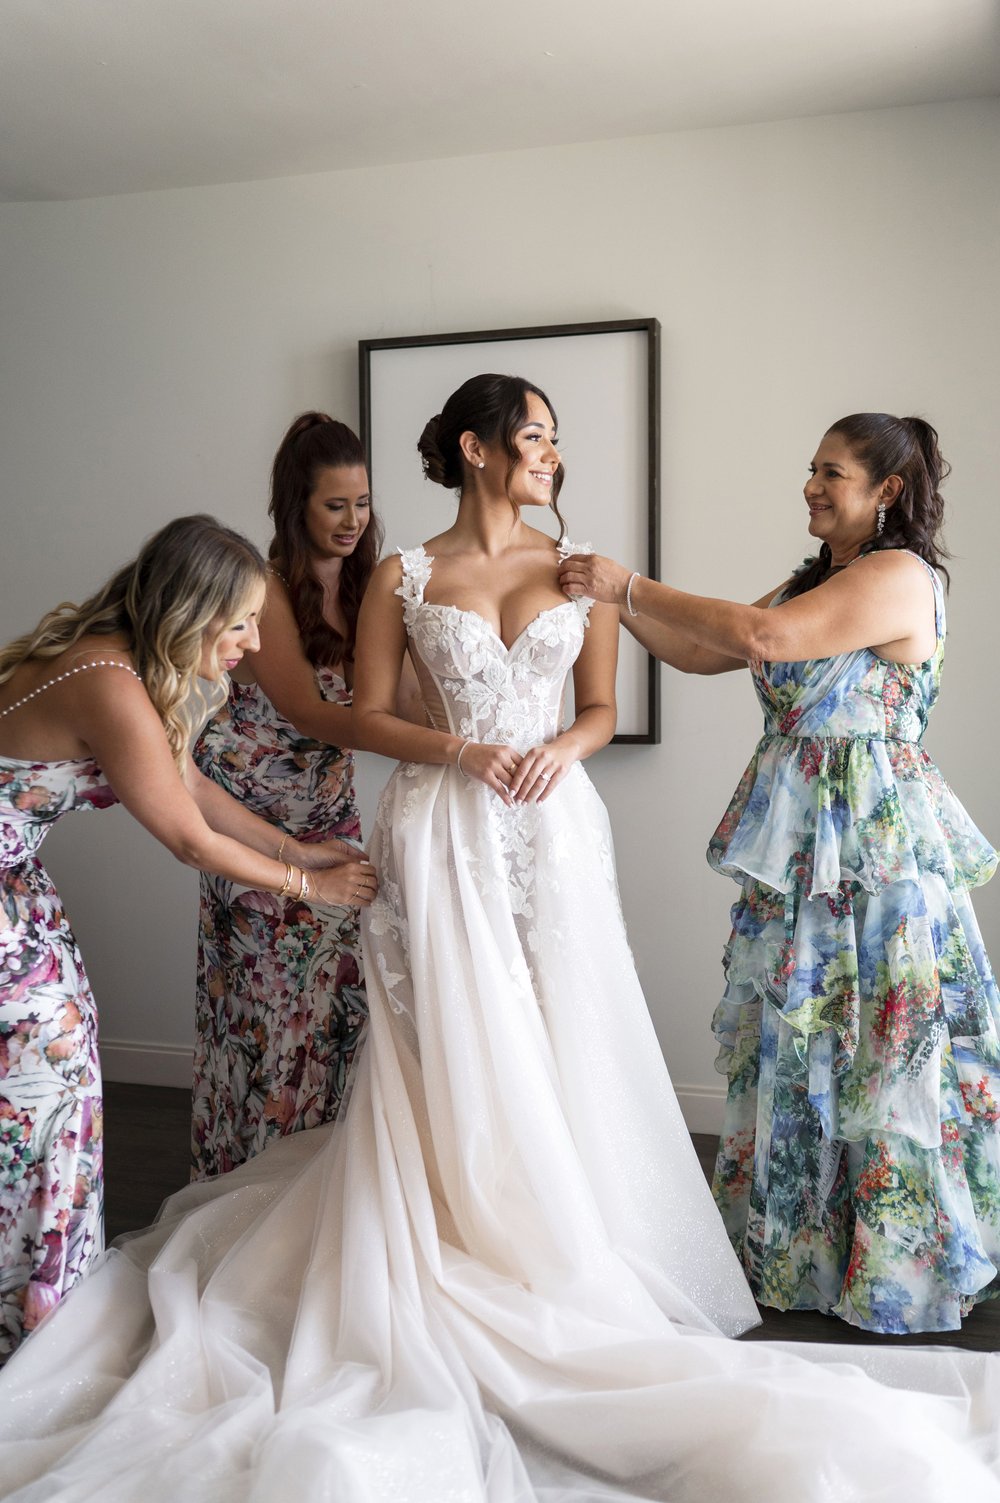 bridesmaids helping bride putting on her dress